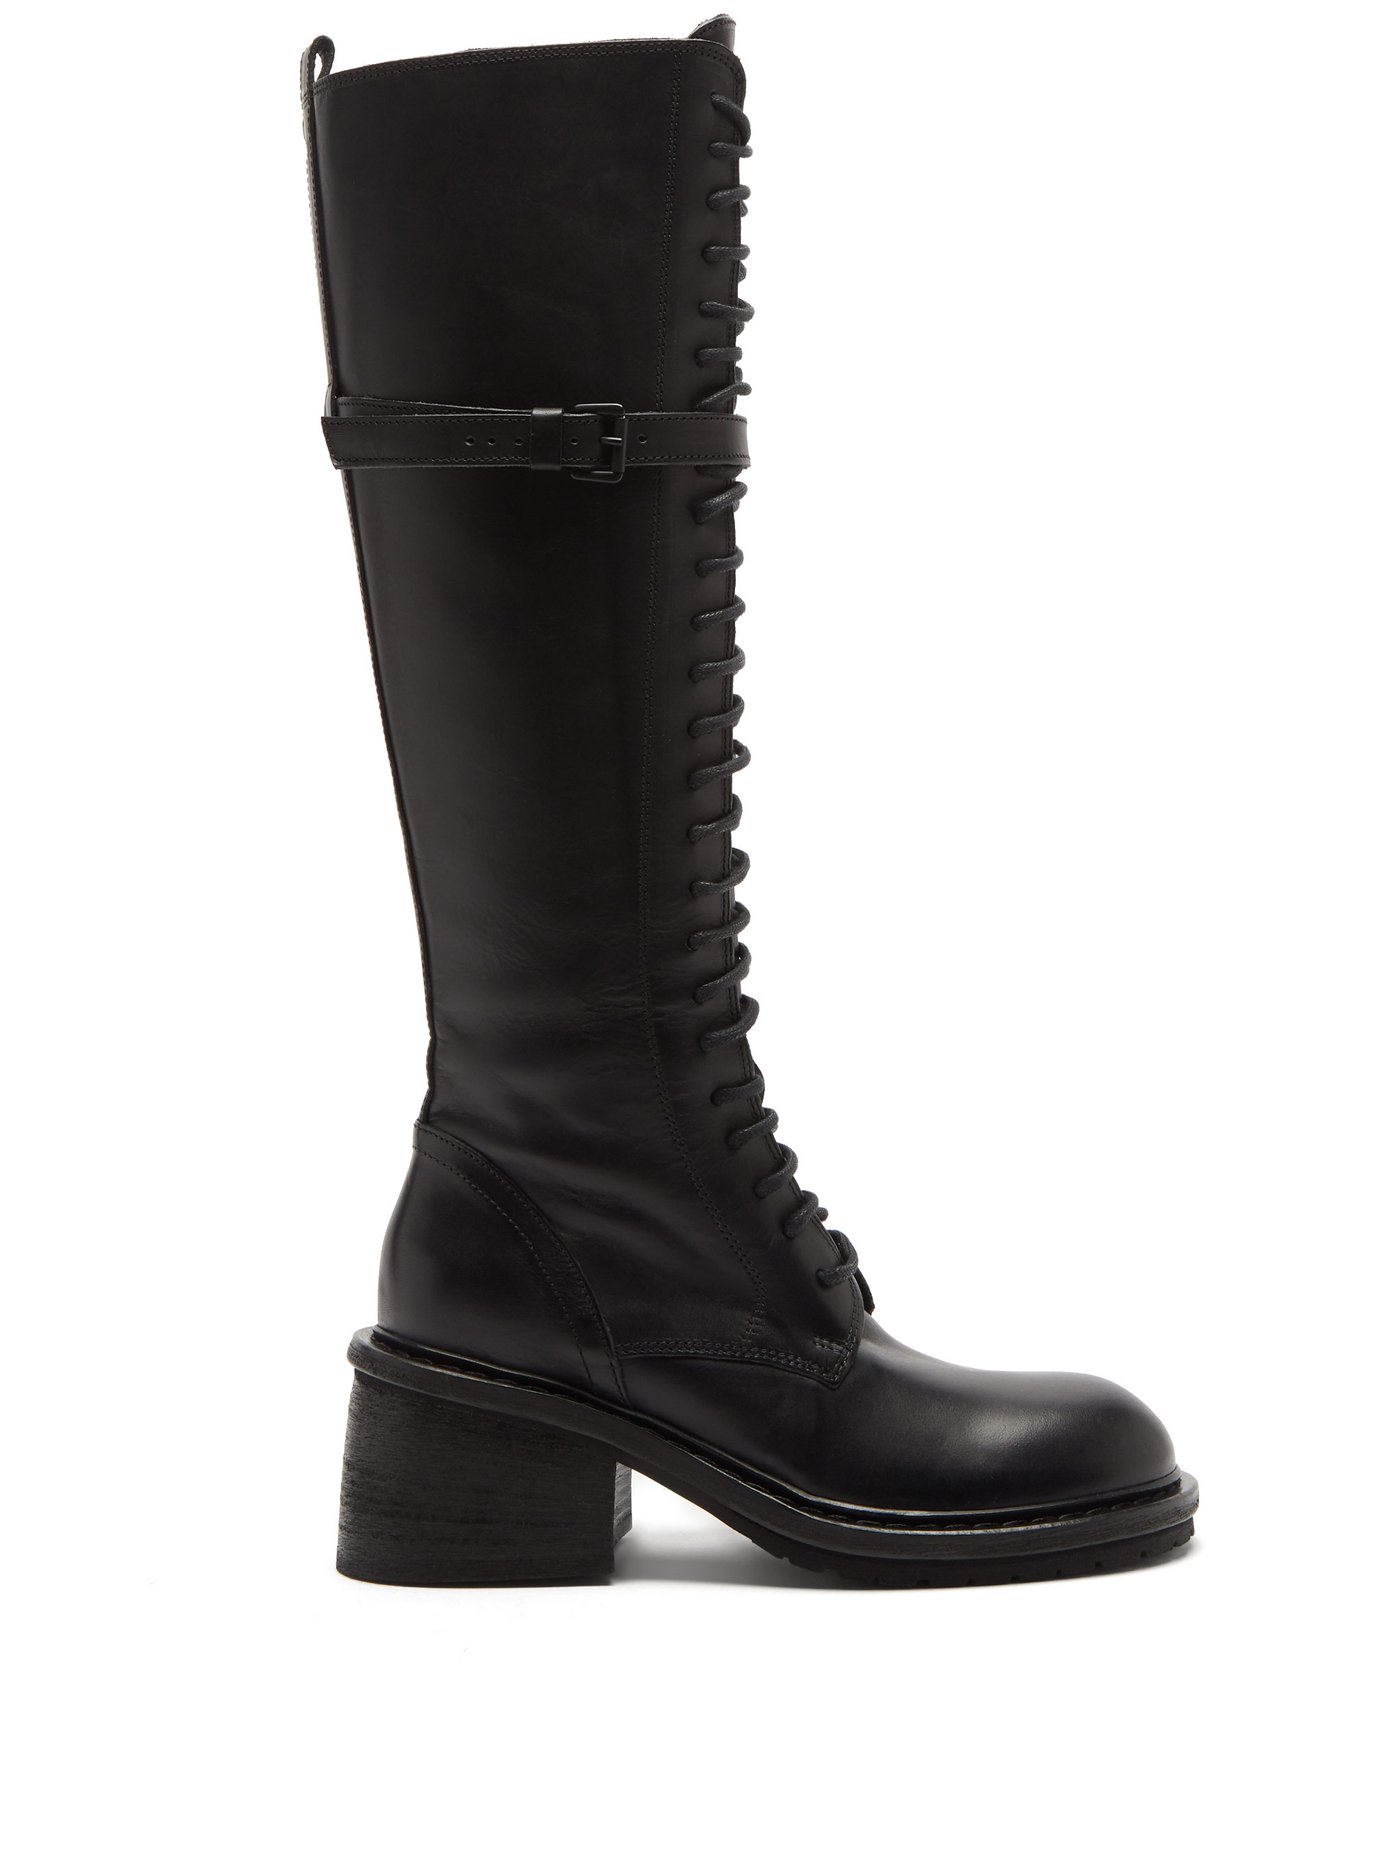 knee high black lace up boots